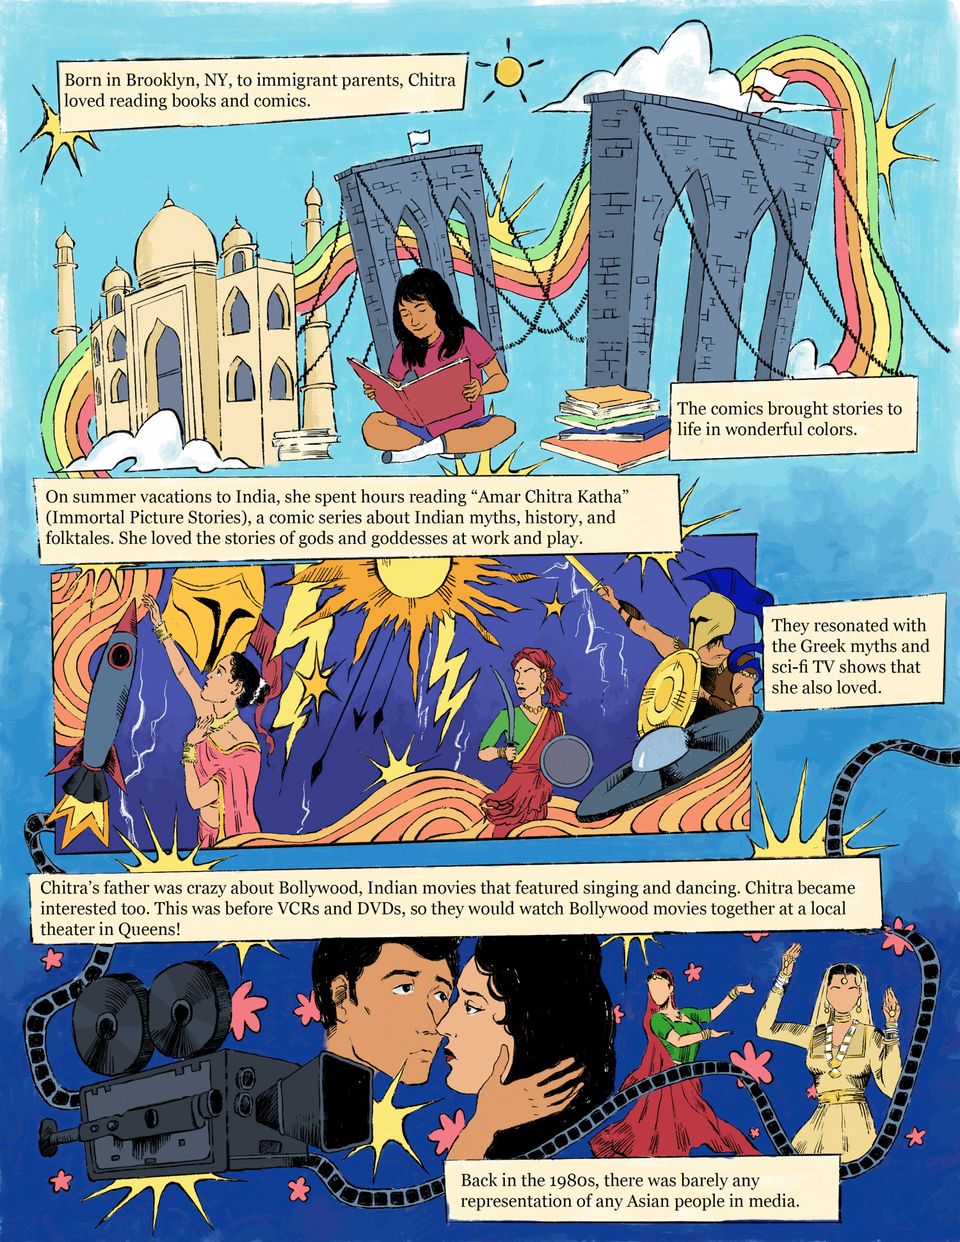 Illustration and description of Chitra's childhood, growing up between New York and India, with Indian comics and Bollywood scenes.